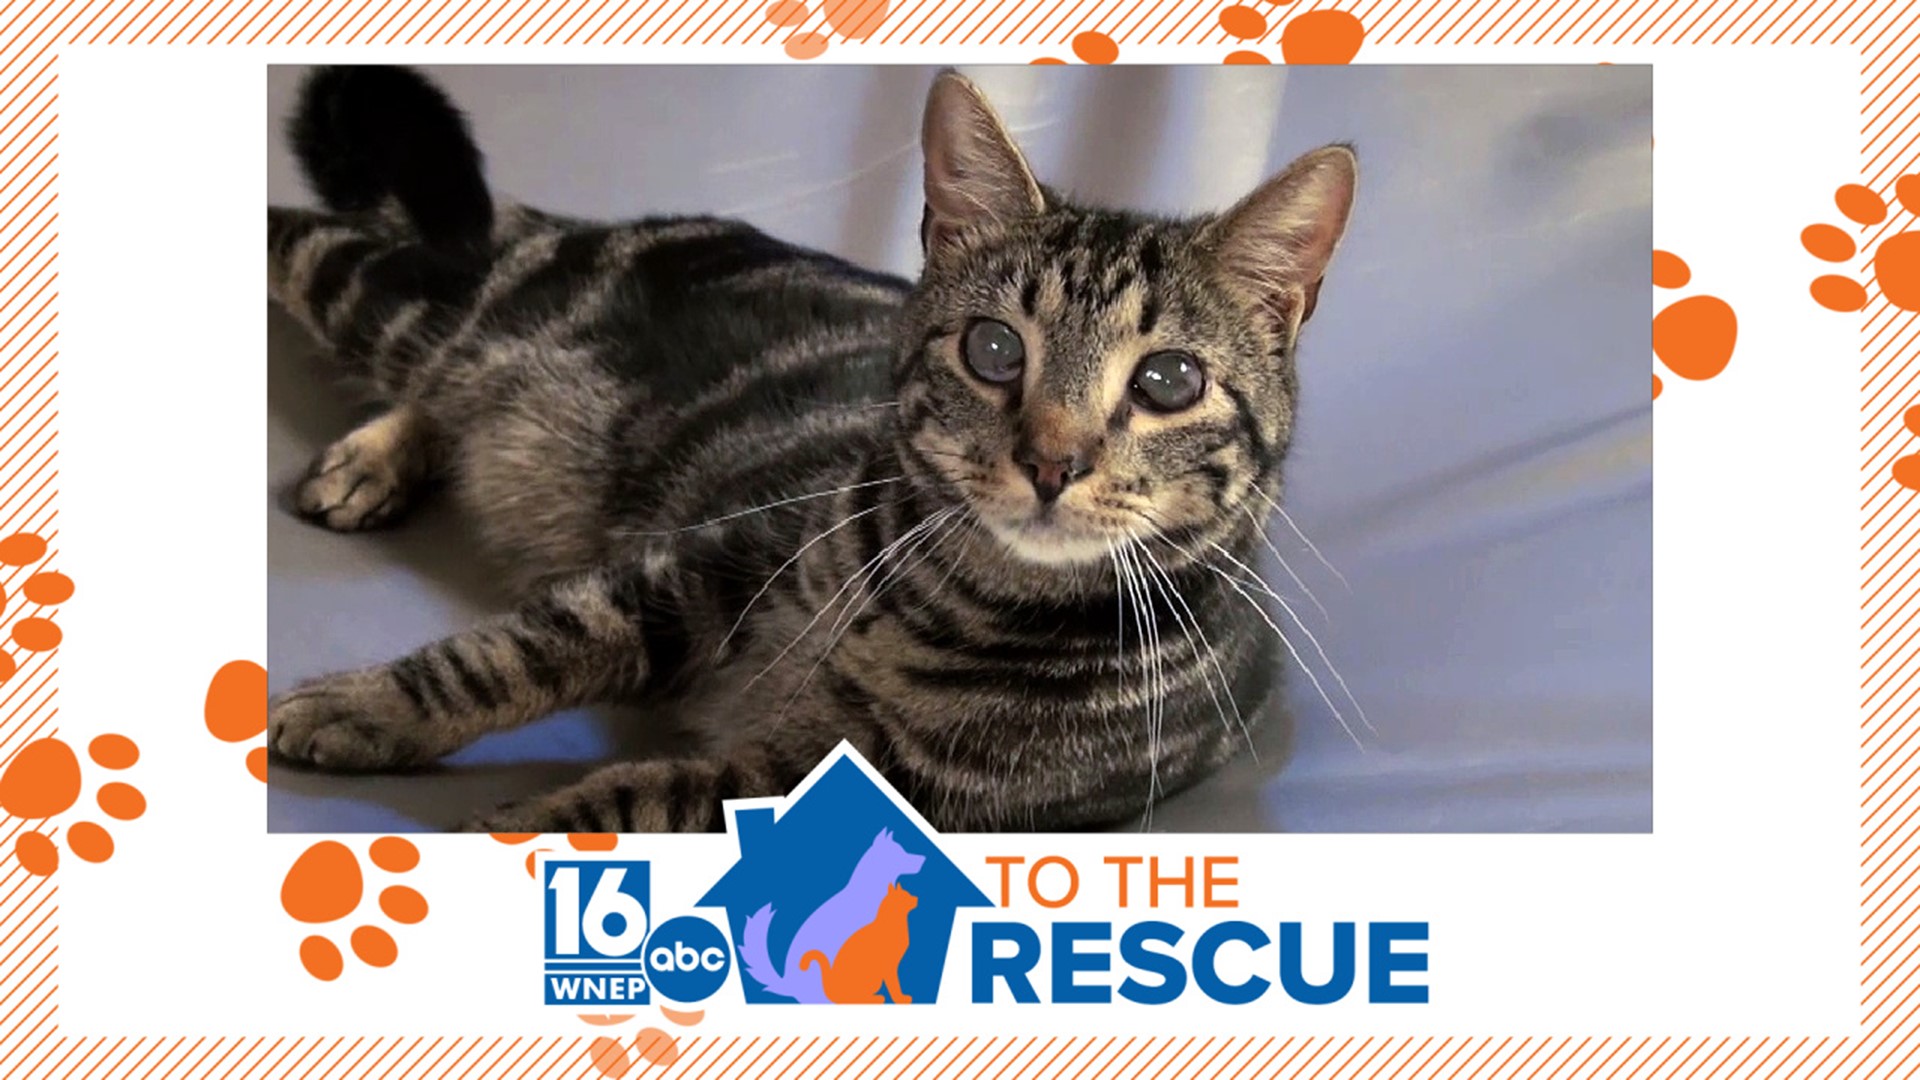 In this week's 16 To The Rescue, we meet a one-year-old cat who was rescued from a hoarding situation a few months ago.